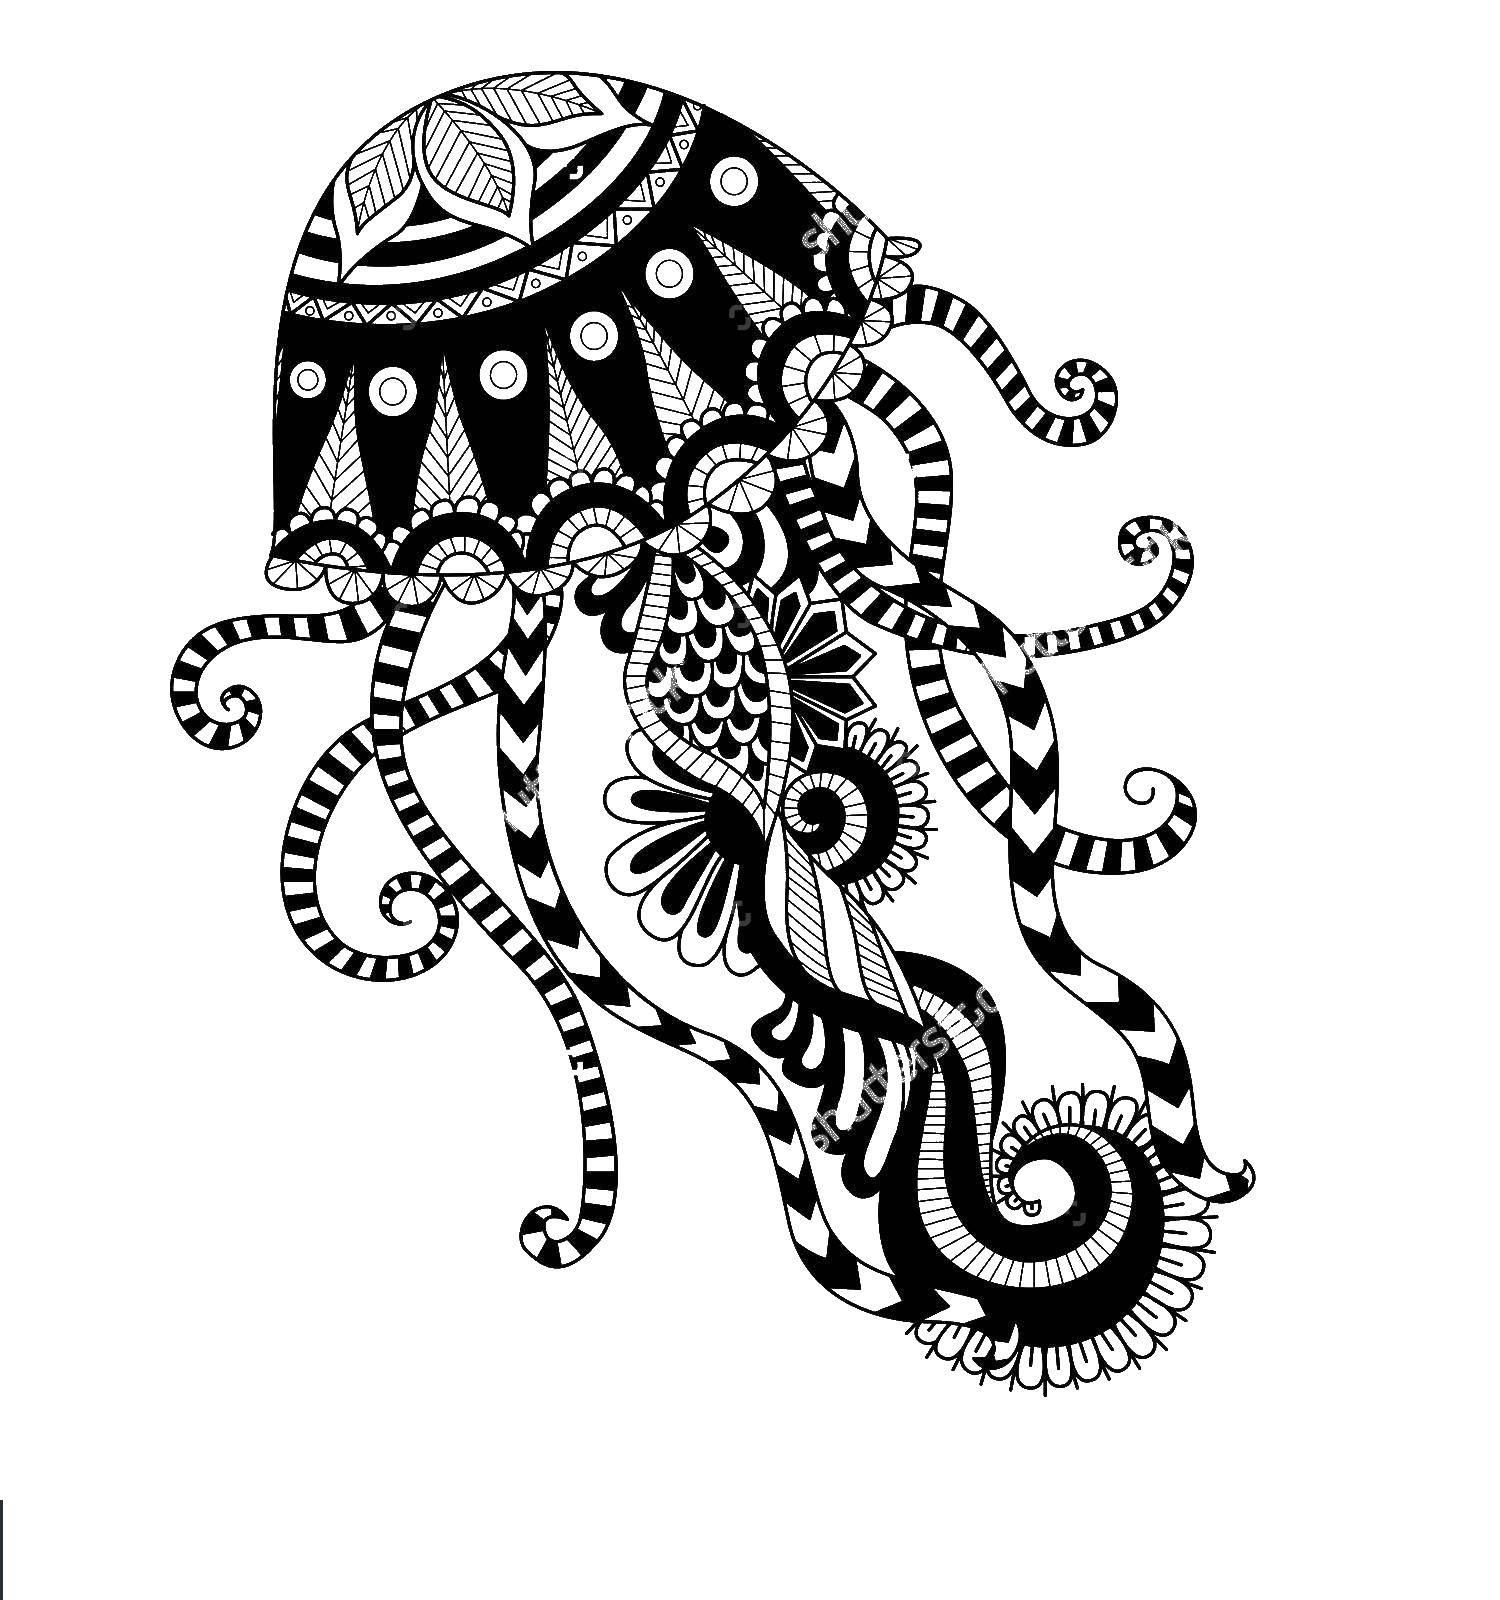 Coloring Patterned jellyfish. Category Sea animals. Tags:  Underwater world, jellyfish.